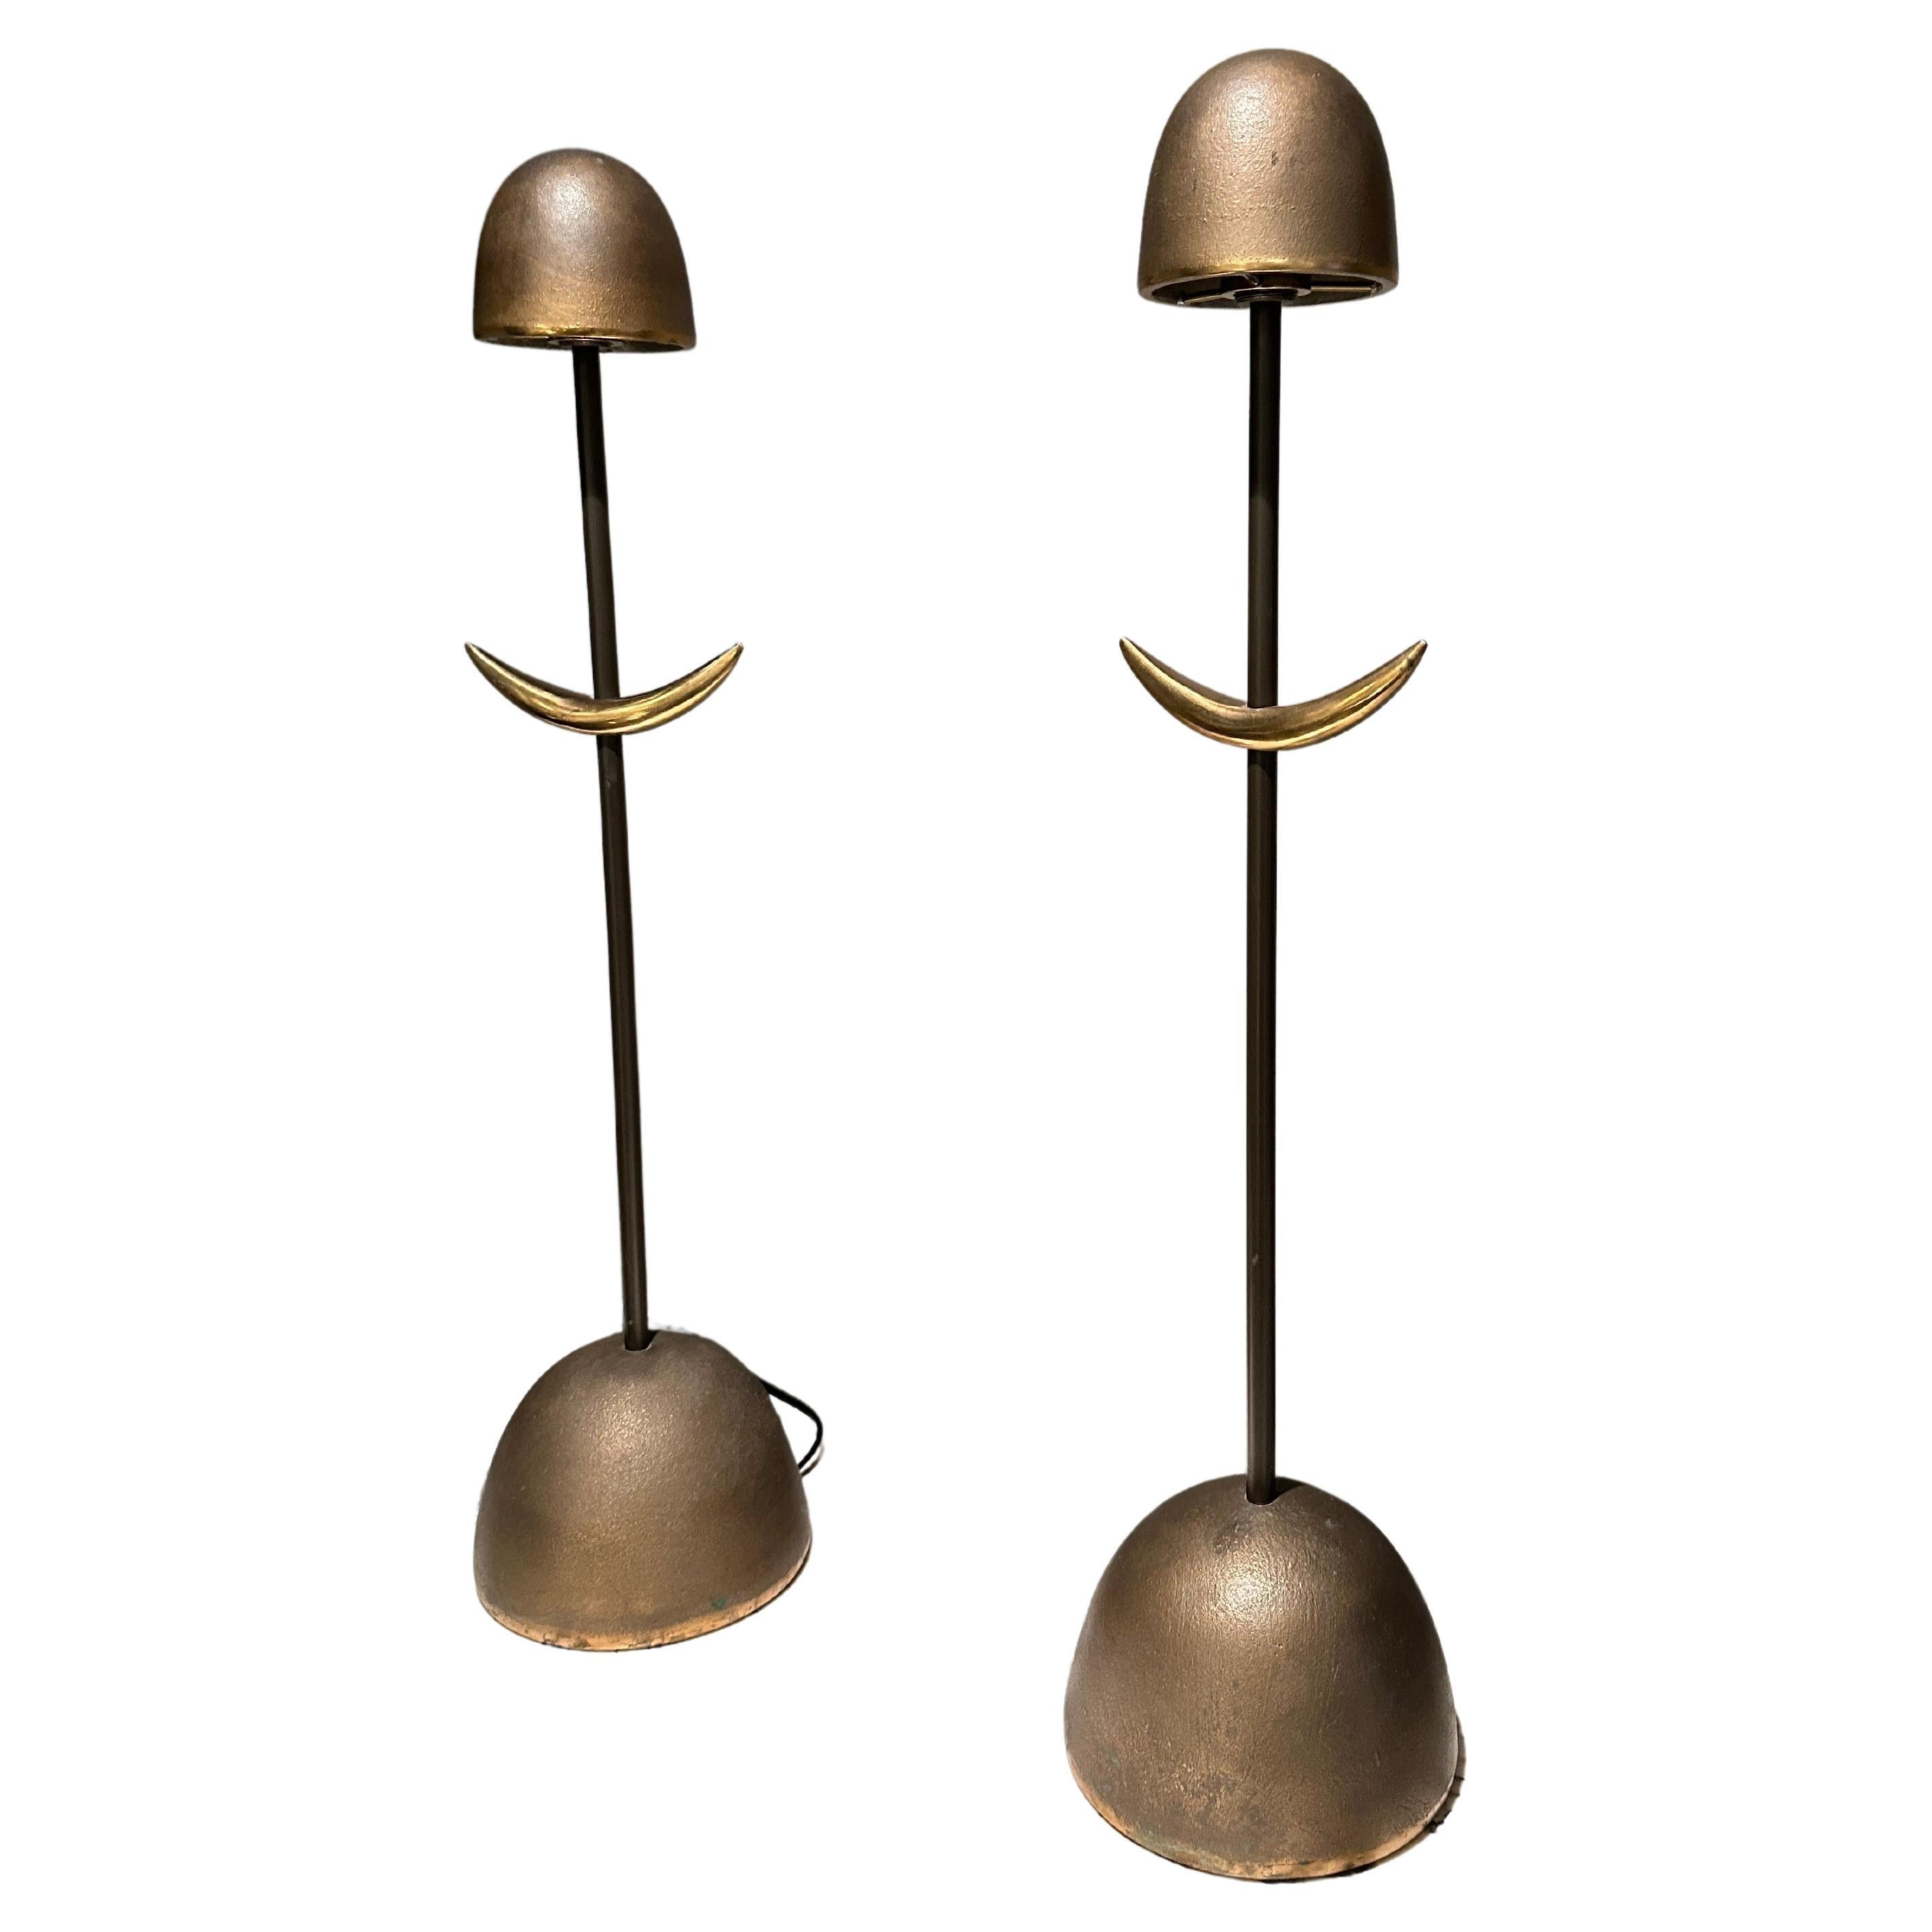 A pair of quality modernist table lamps in cast Bronze and Brass, by Dutch design duo Mies and Van Gessel produced by Quasar Holland. Known for taking their inspiration from nature and architecture, also for working with superior materials. 